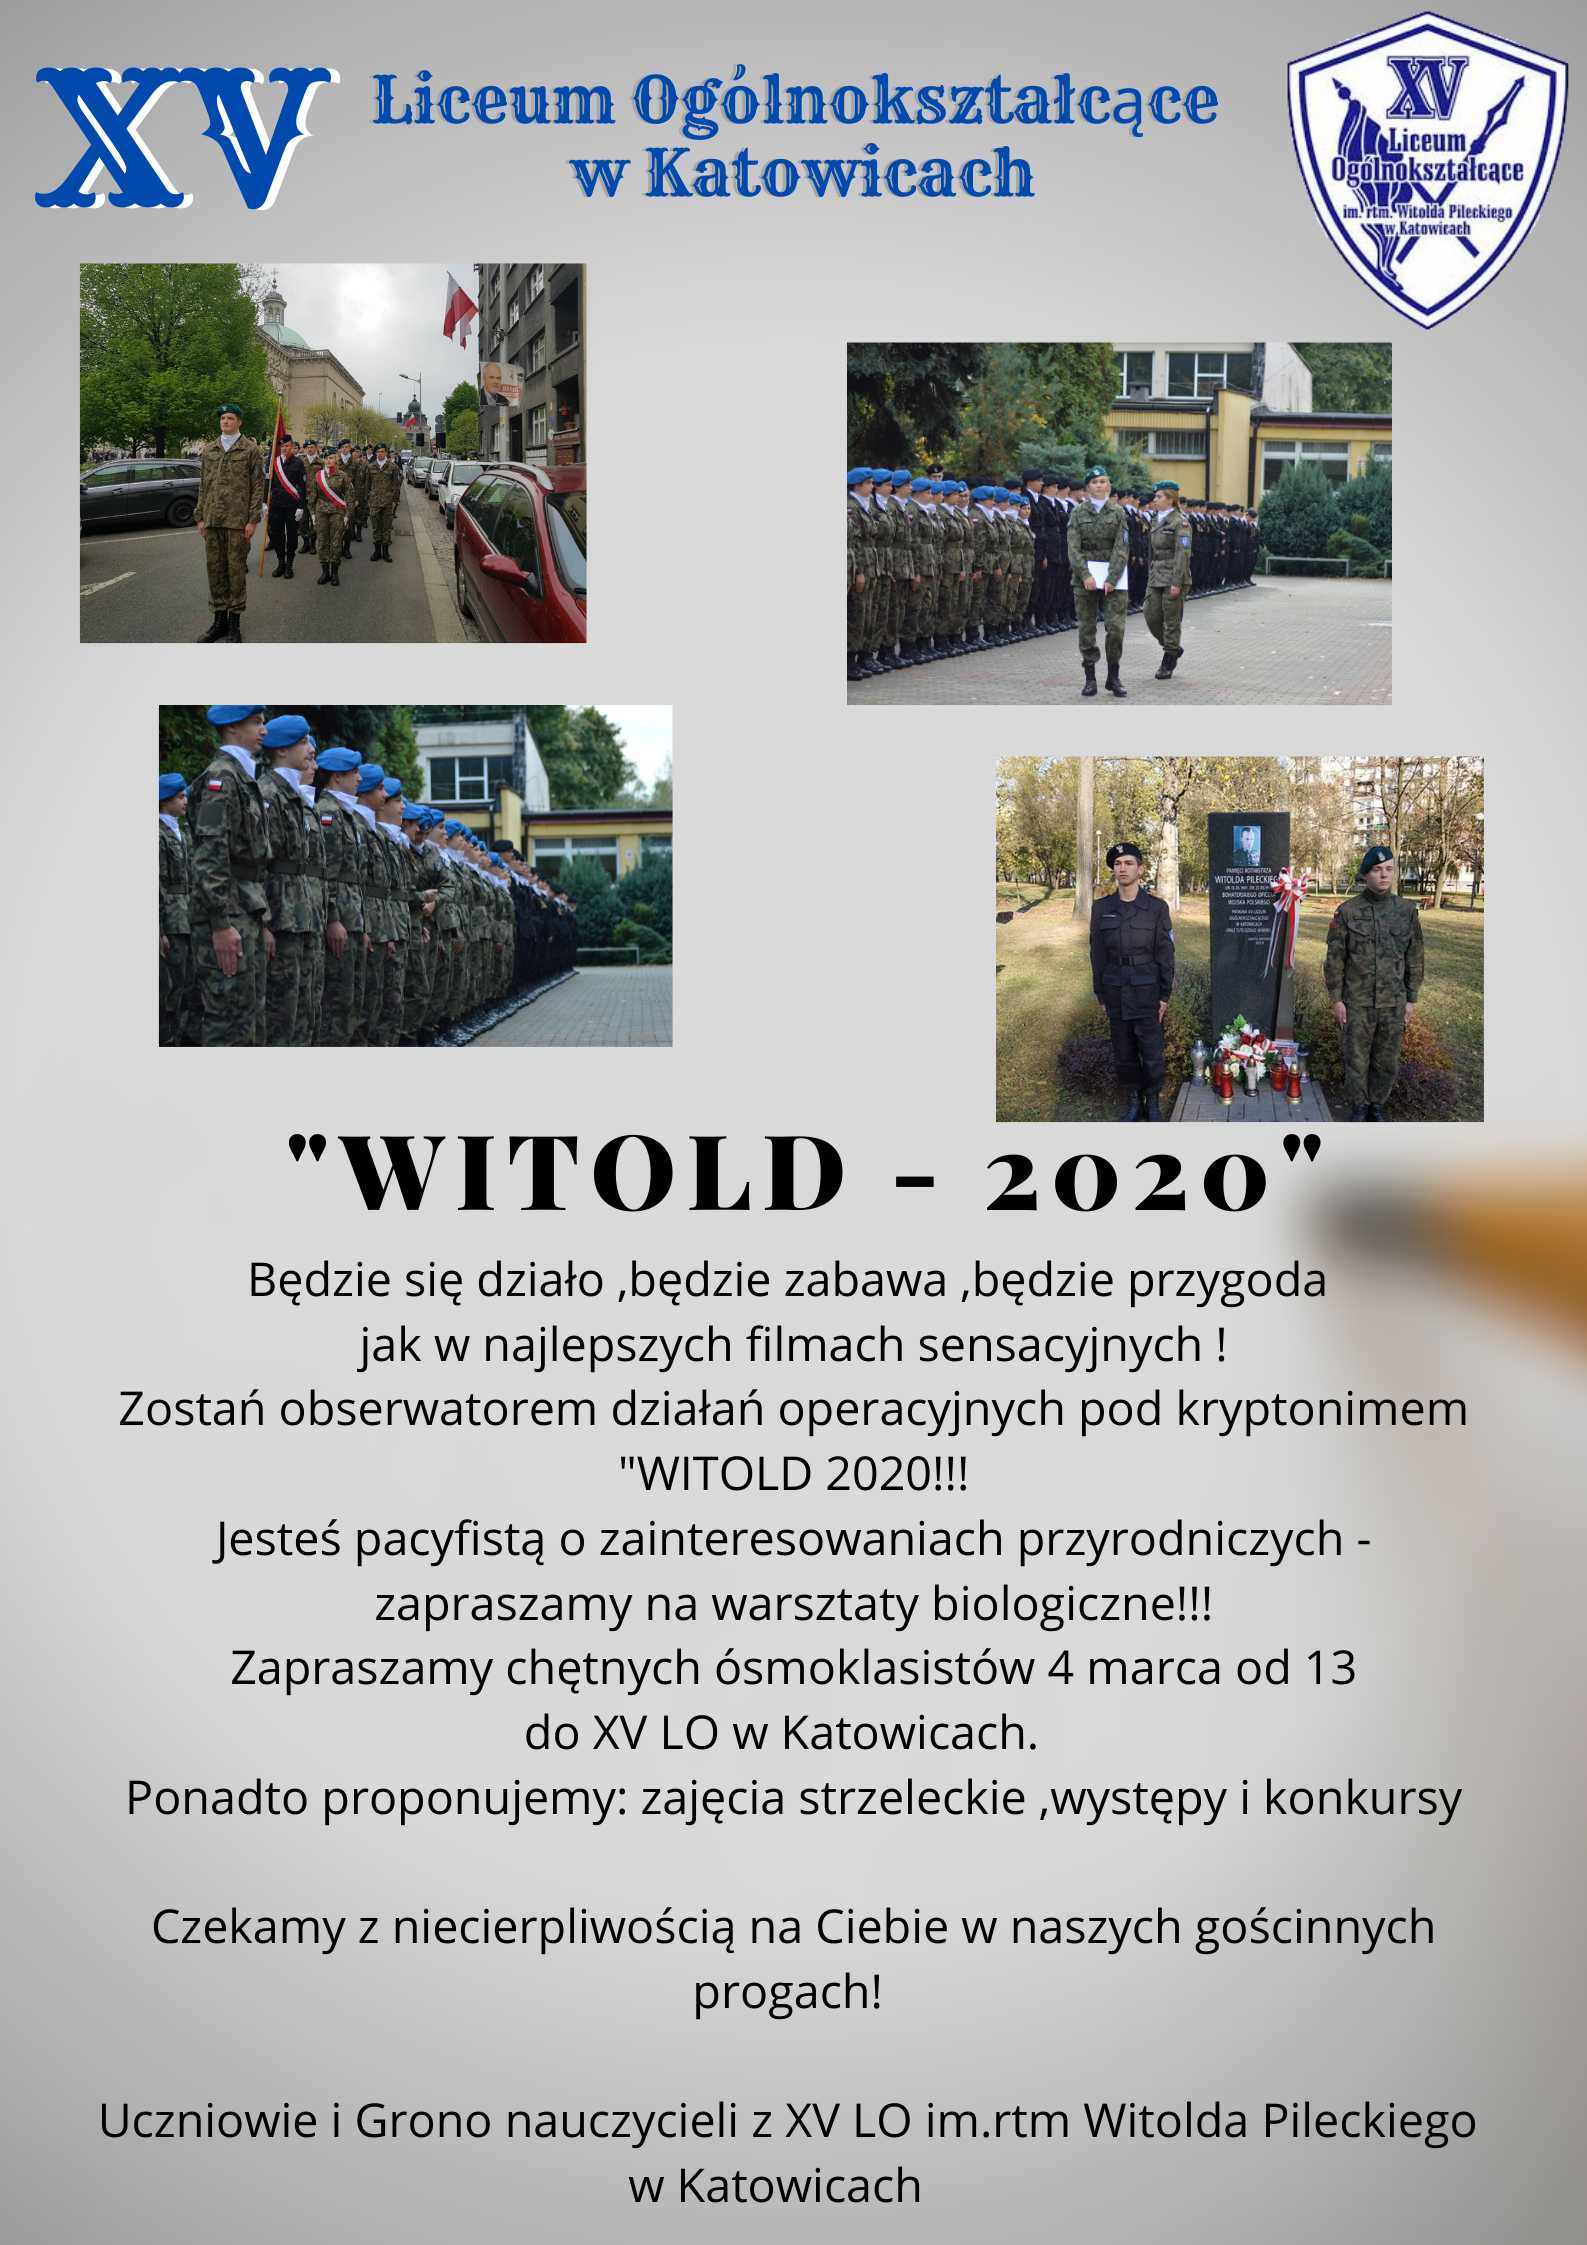 Witold 2020